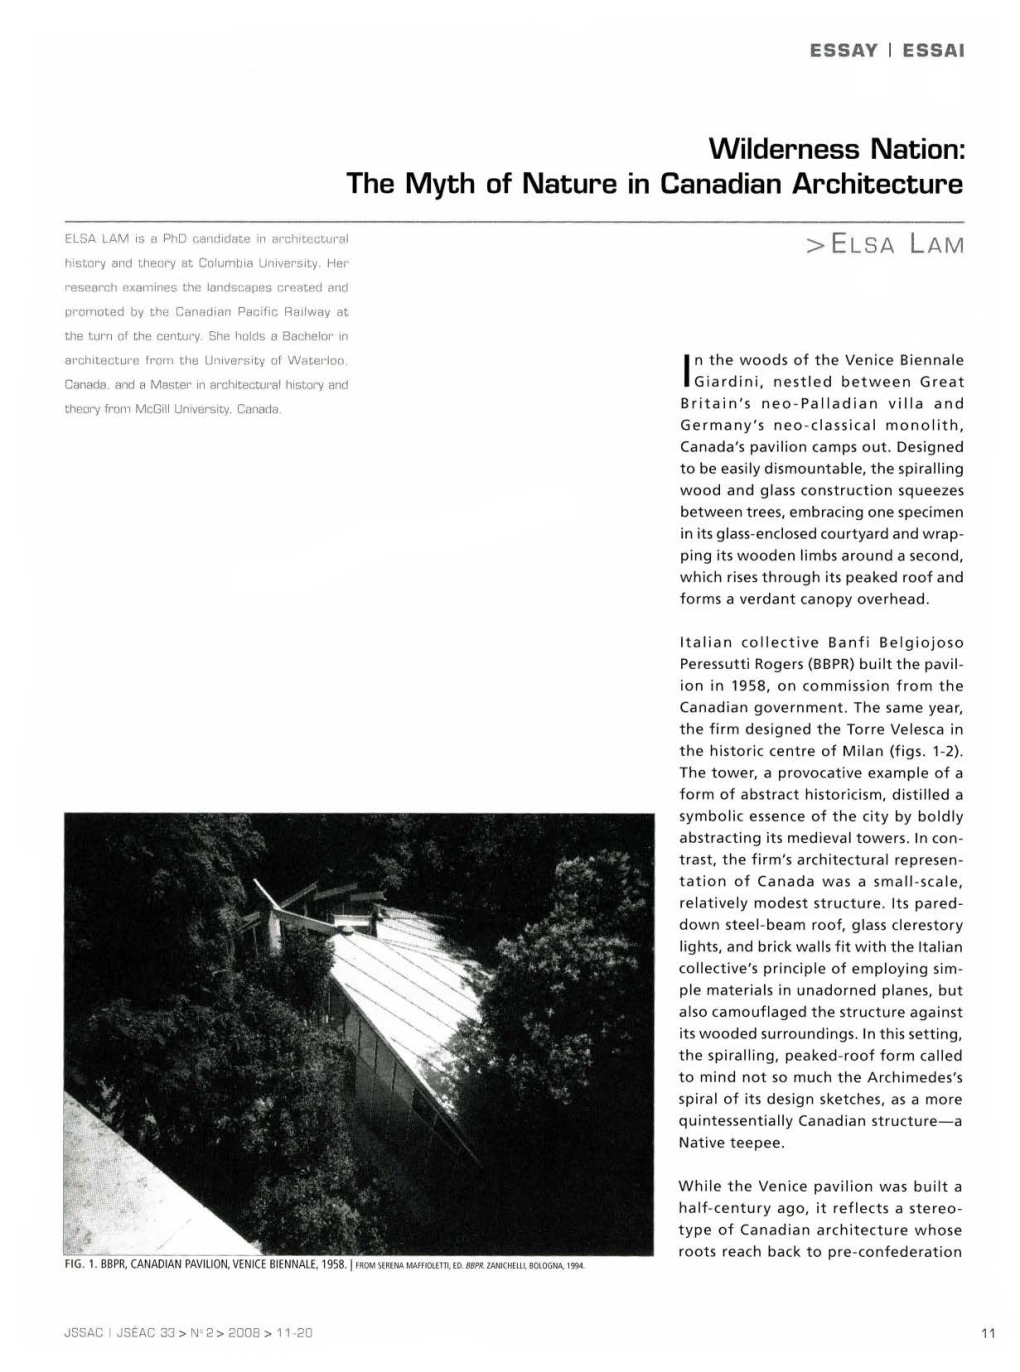 Wilderness Nation: the Myth of Nature in Canadian Architecture